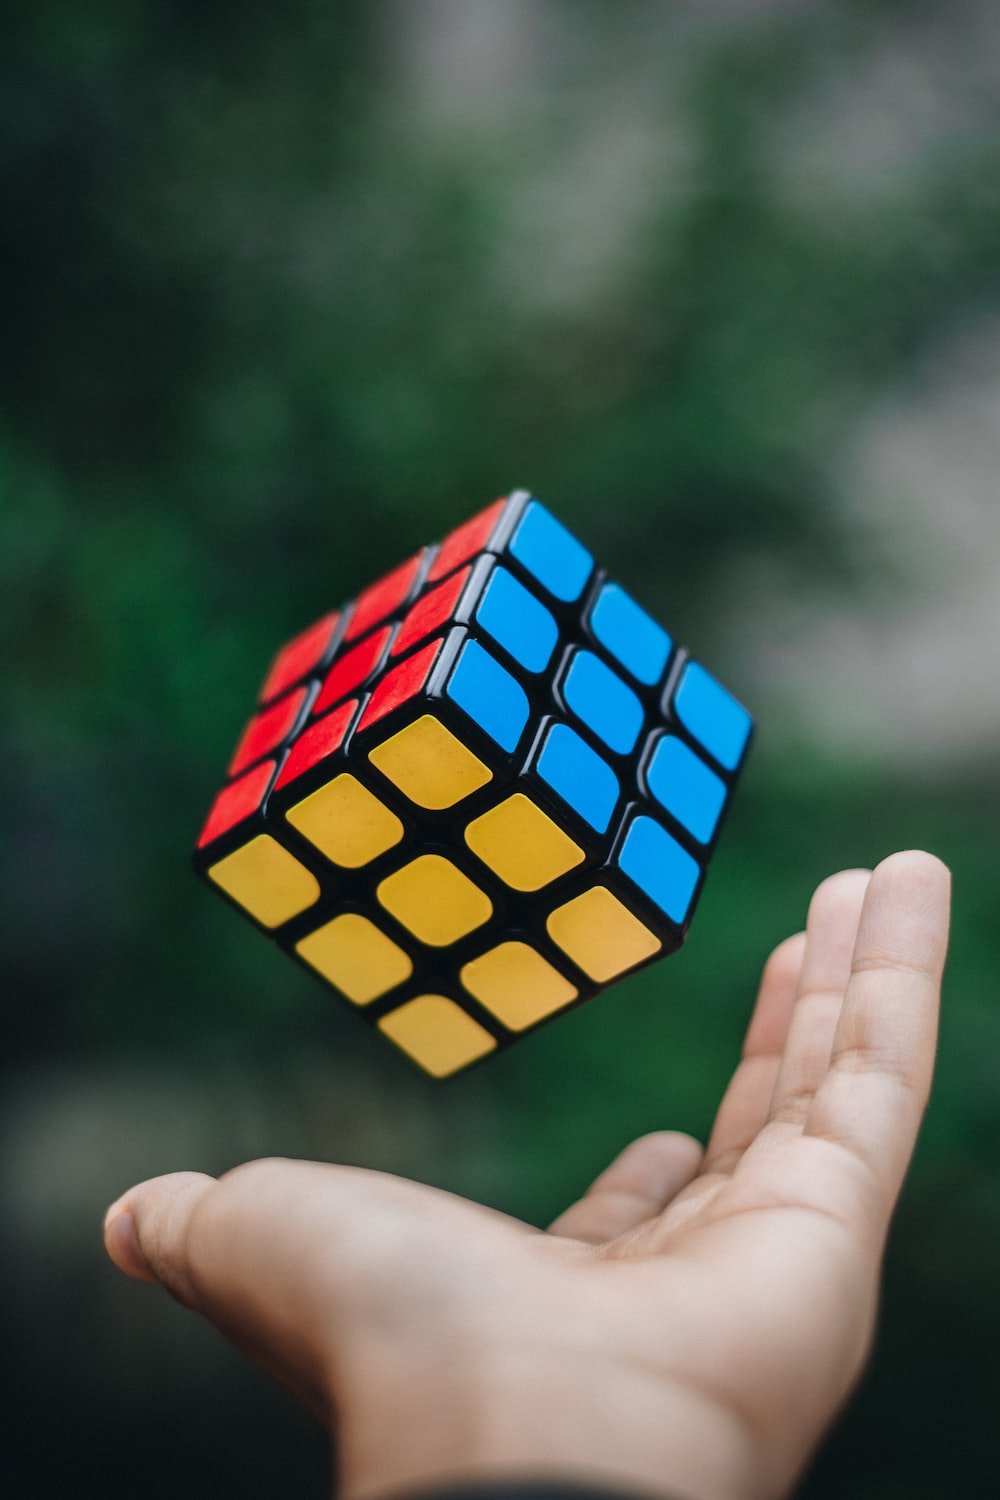 Rubik's Cube is a puzzle. So is the pandemic. Both are solved with